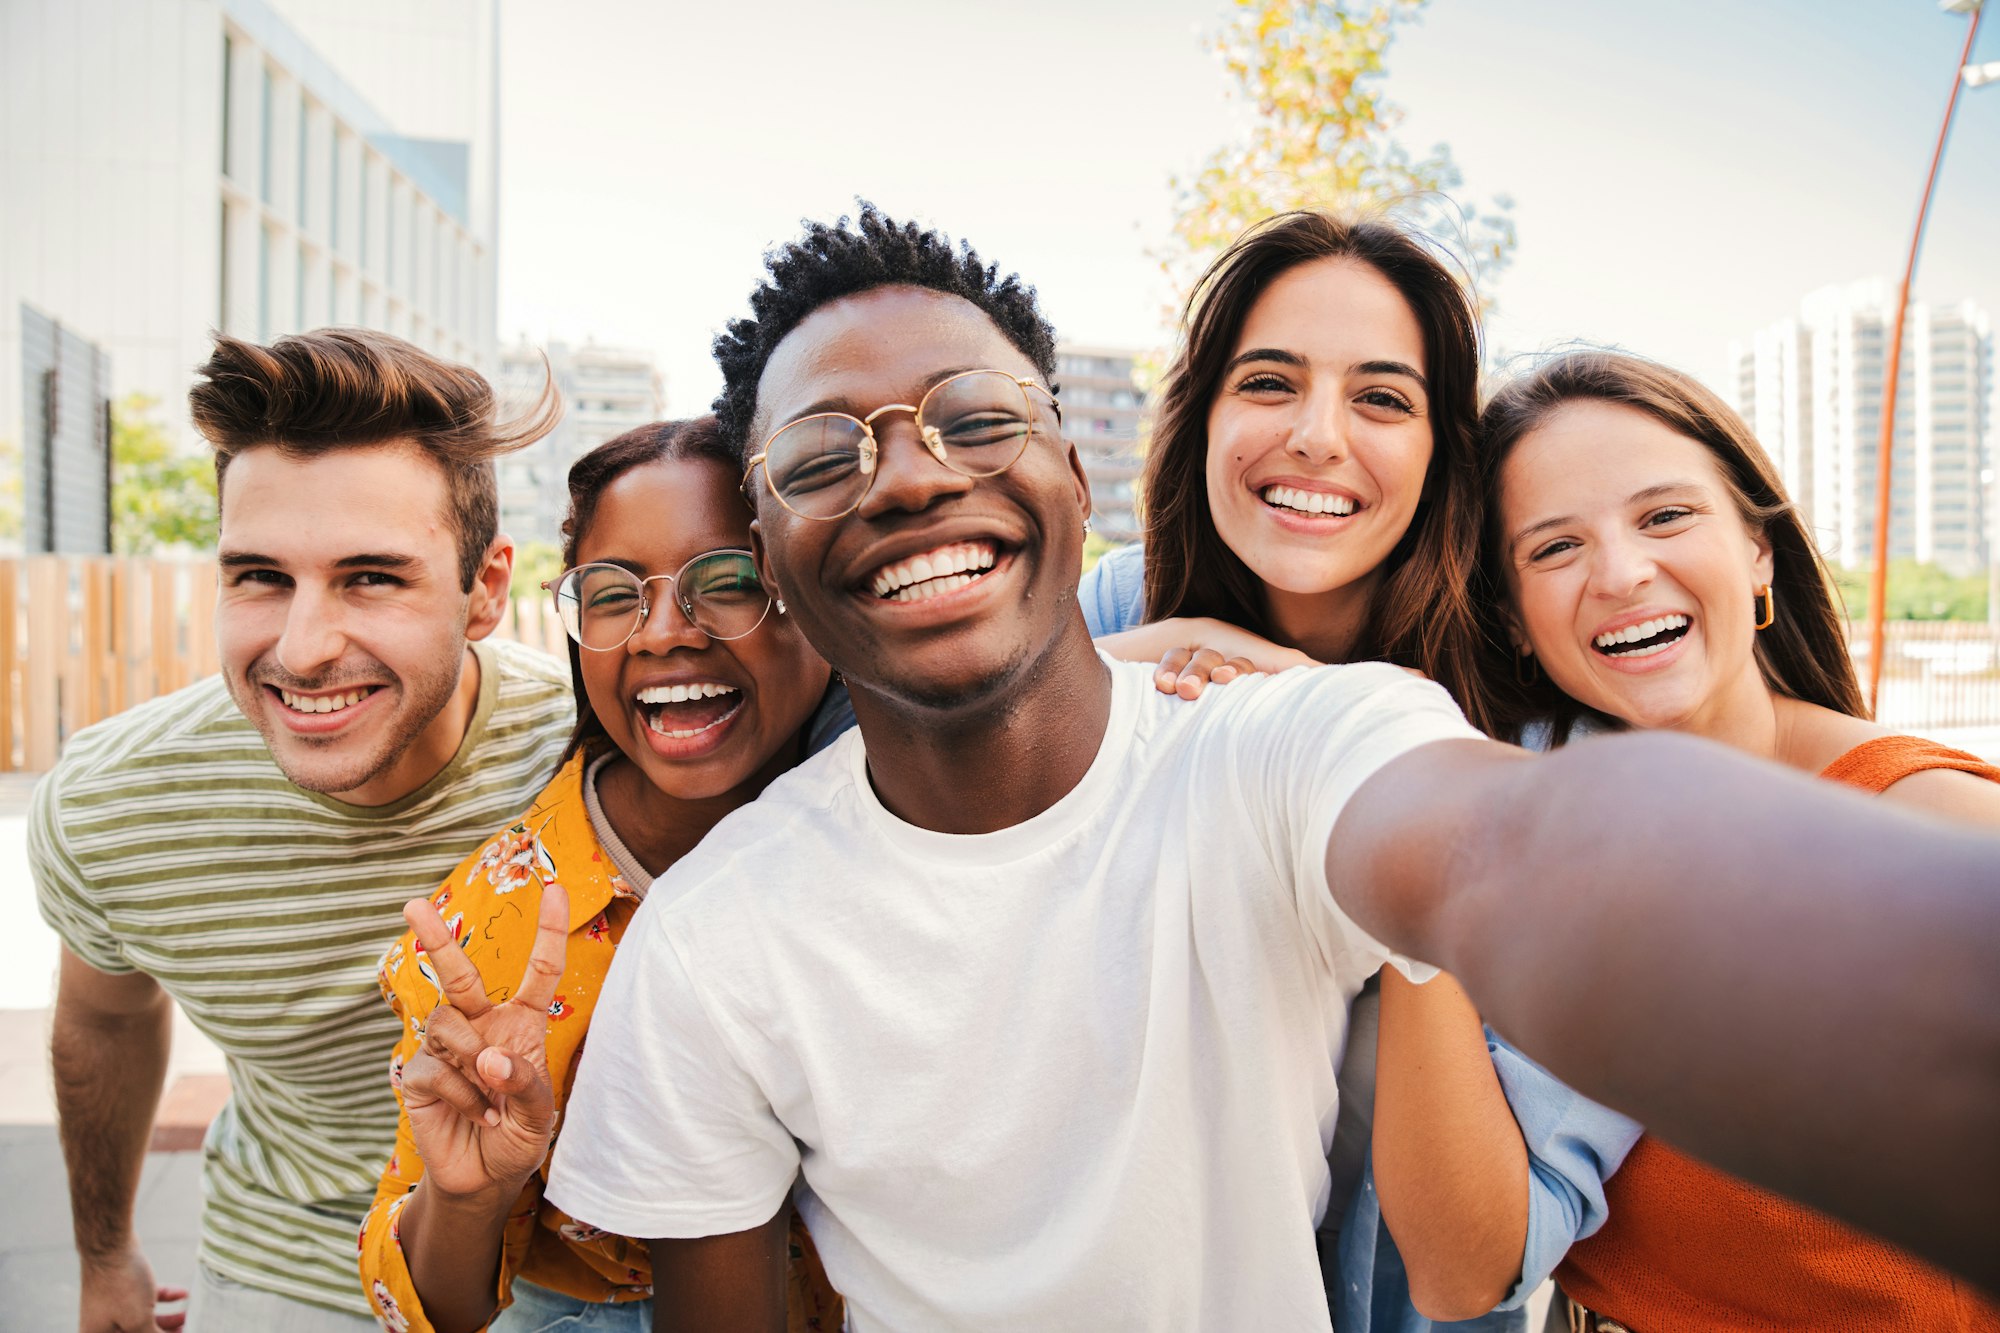 Group of multiracial young student people smiling and taking a selfie together. Close up portrait of